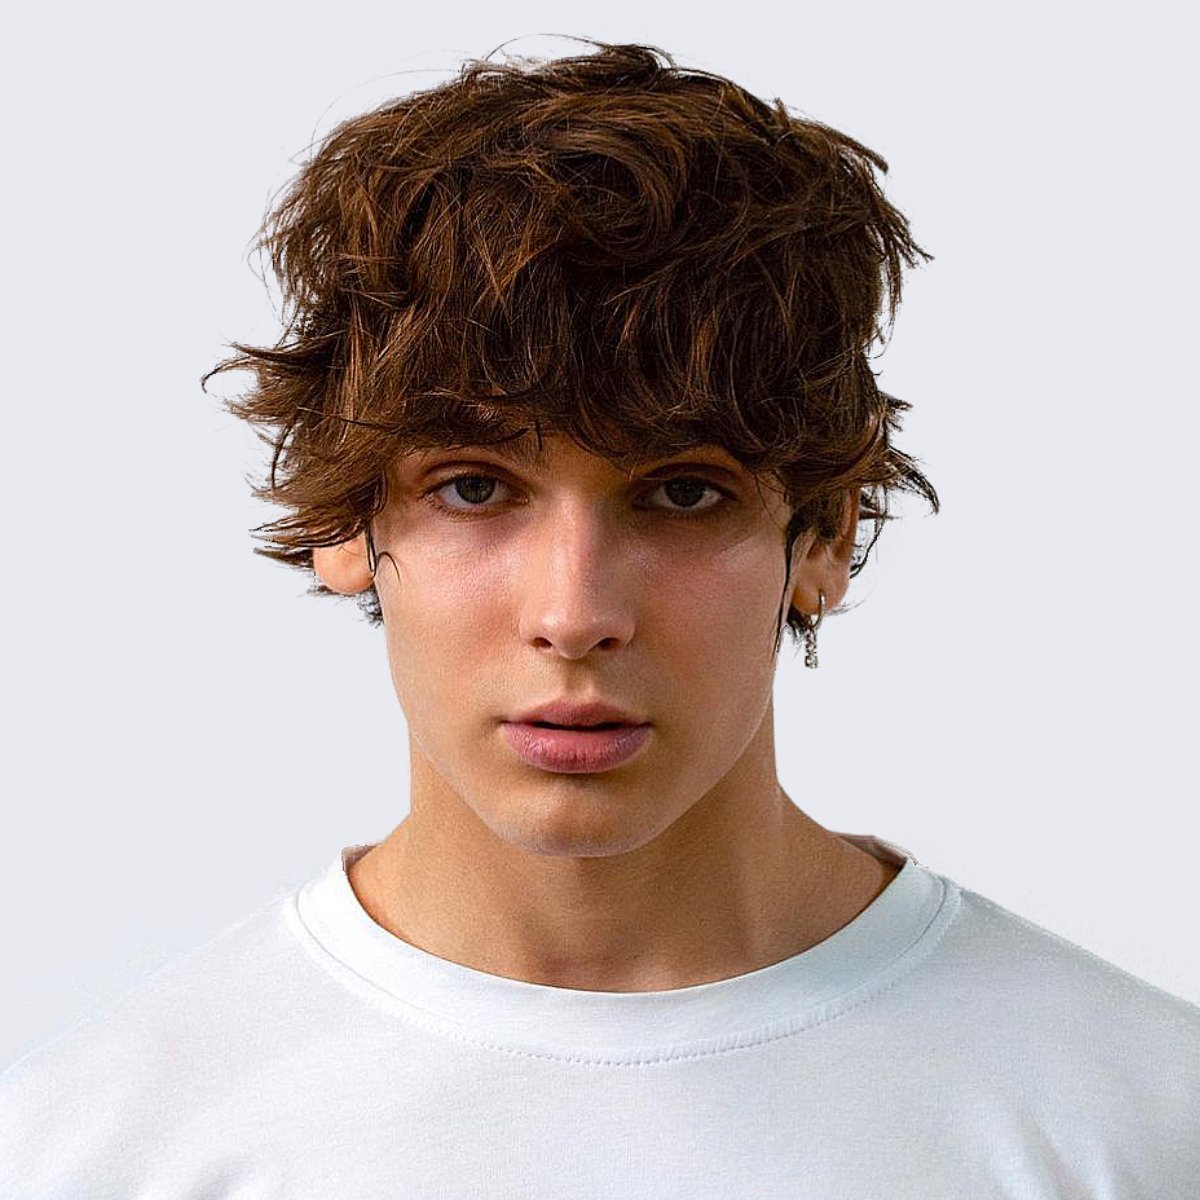 Hot Upcoming Men's Hairstyle Trends For 2022